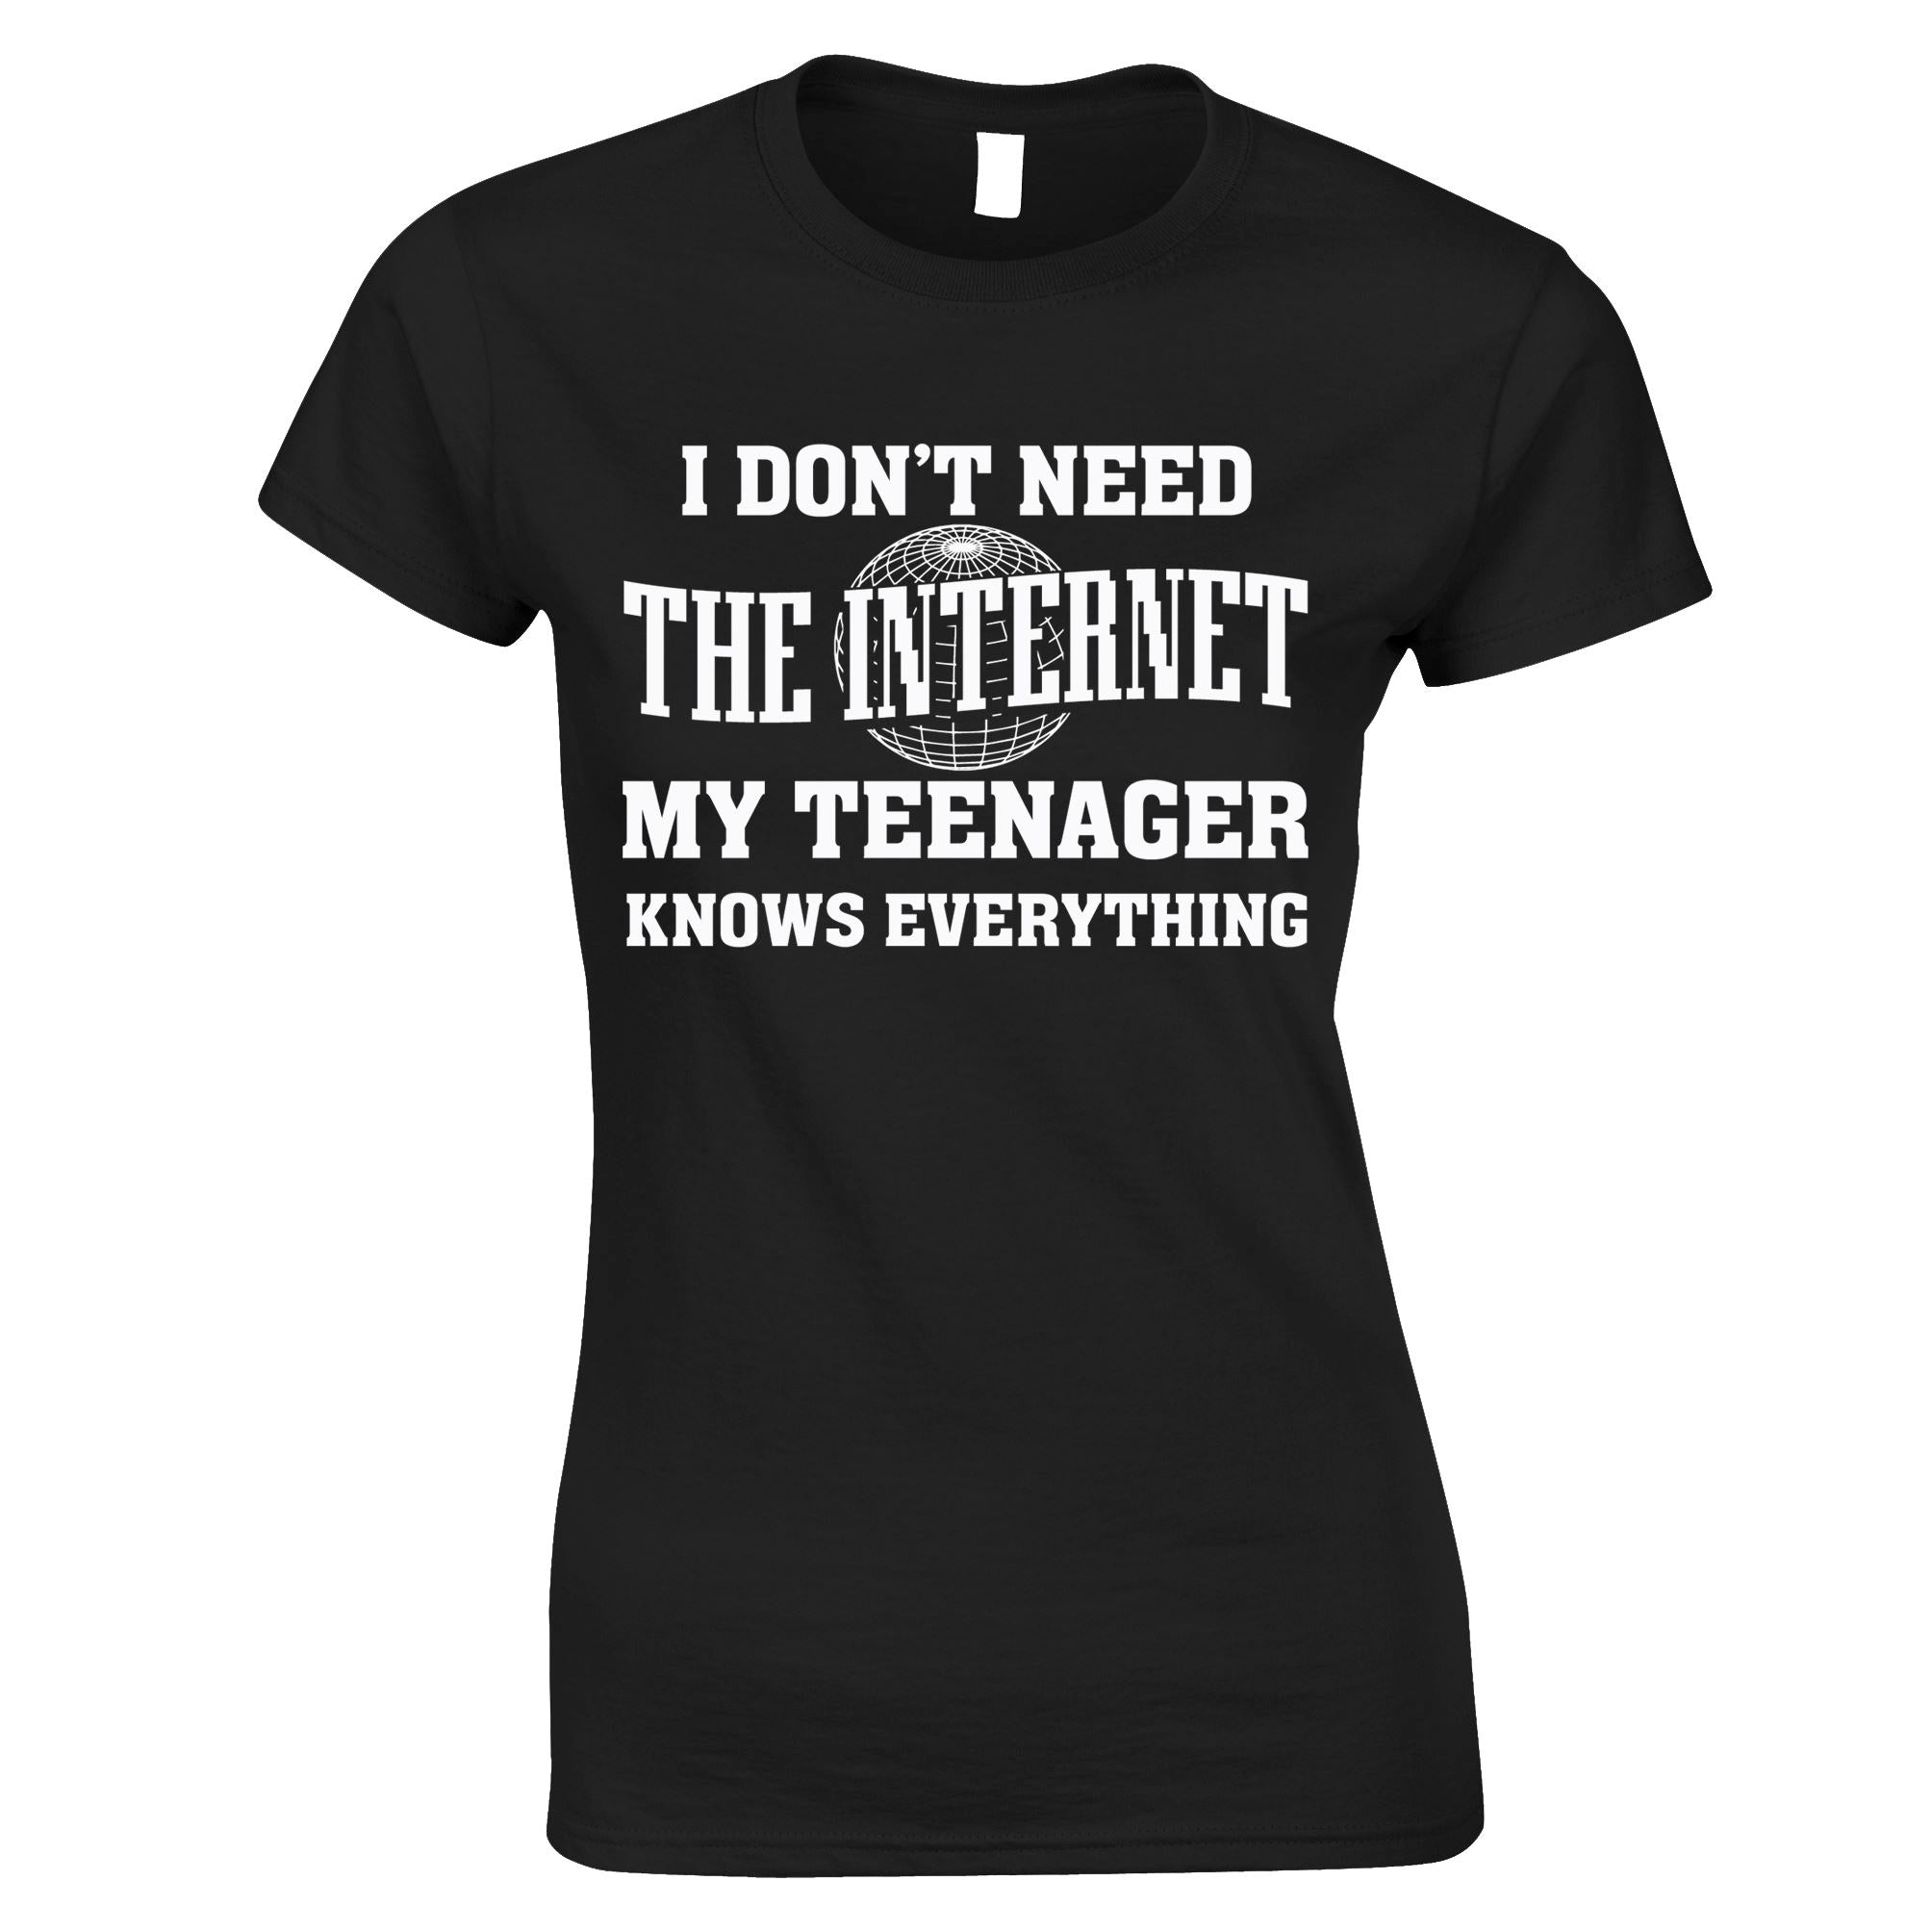 Don't Need The Internet Womens T Shirt Teenager Knows Everything